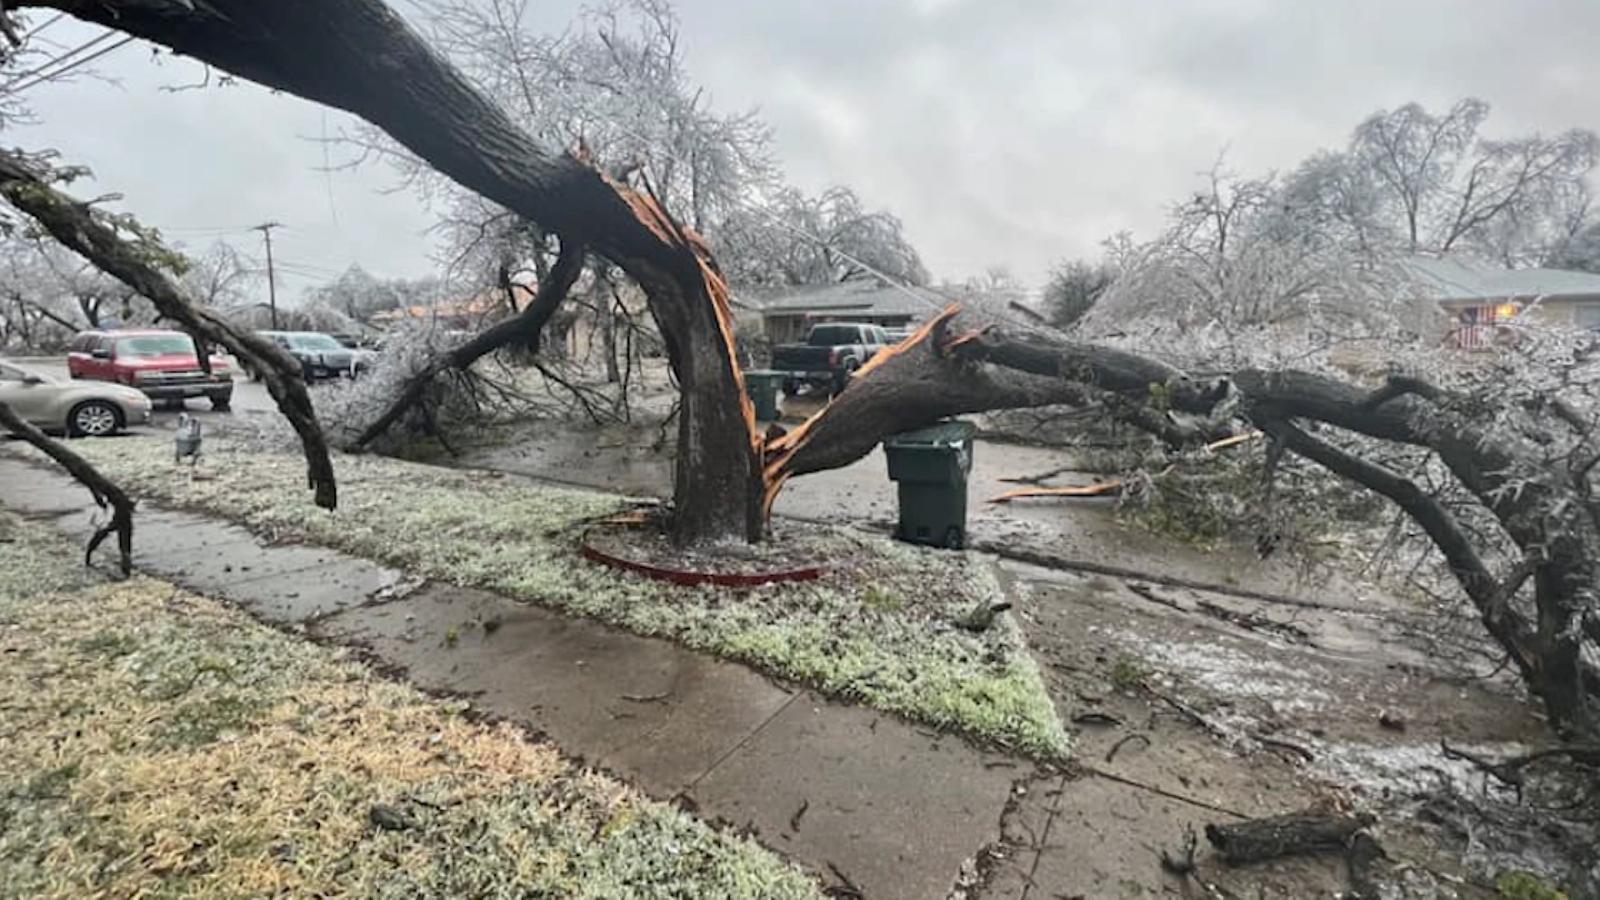 Ice storm in Texas leaves destruction and collapsed trees The Limited